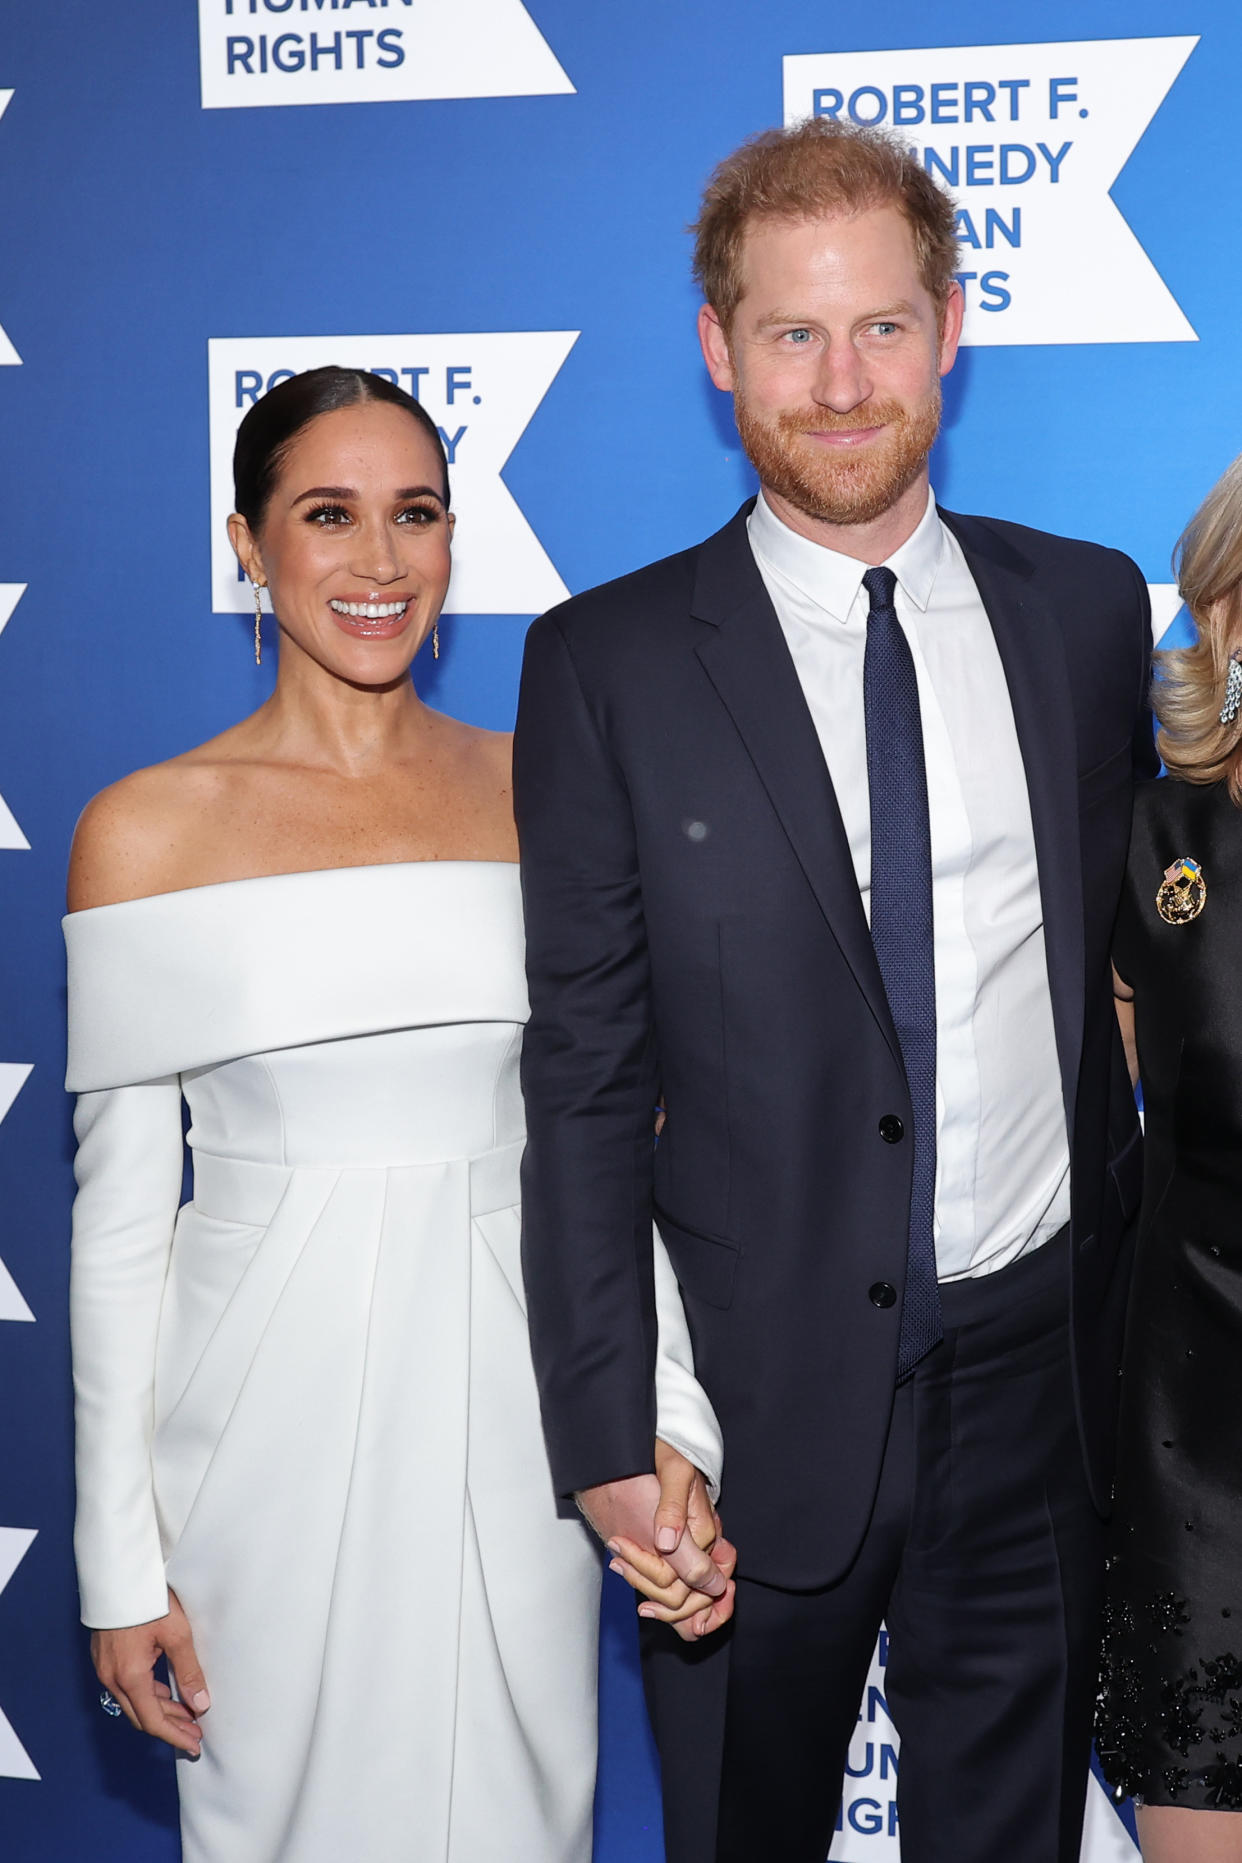 The Duke and Duchess of Sussex at the 2022 Robert F. Kennedy Human Rights Ripple of Hope Gala in December 2022. (Getty Images)